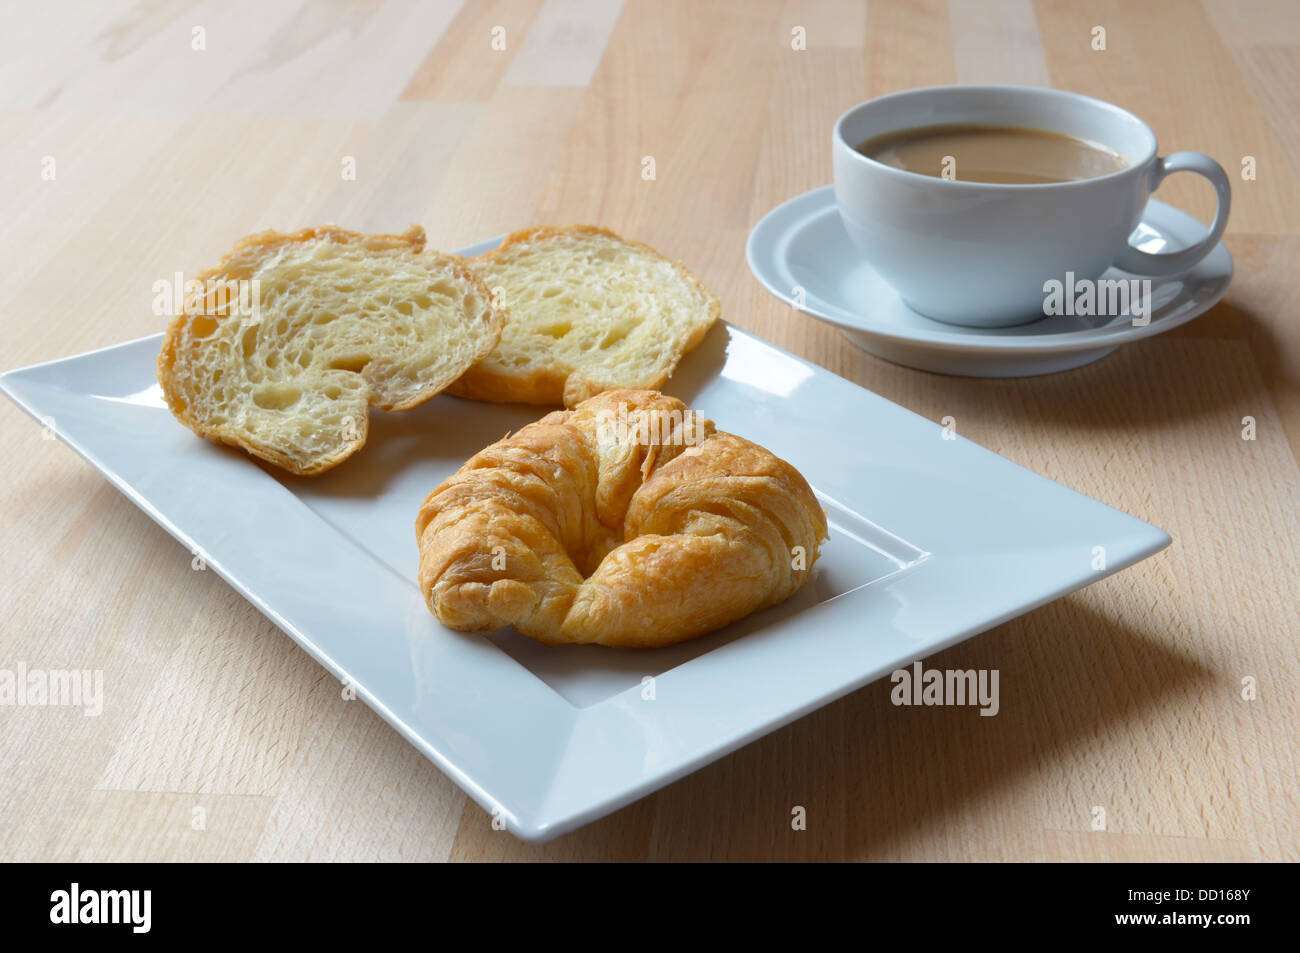 Croissant's on a white rectangular plate on a wooden table with cup and saucer containing white coffee breakfast morning coffee Stock Photo